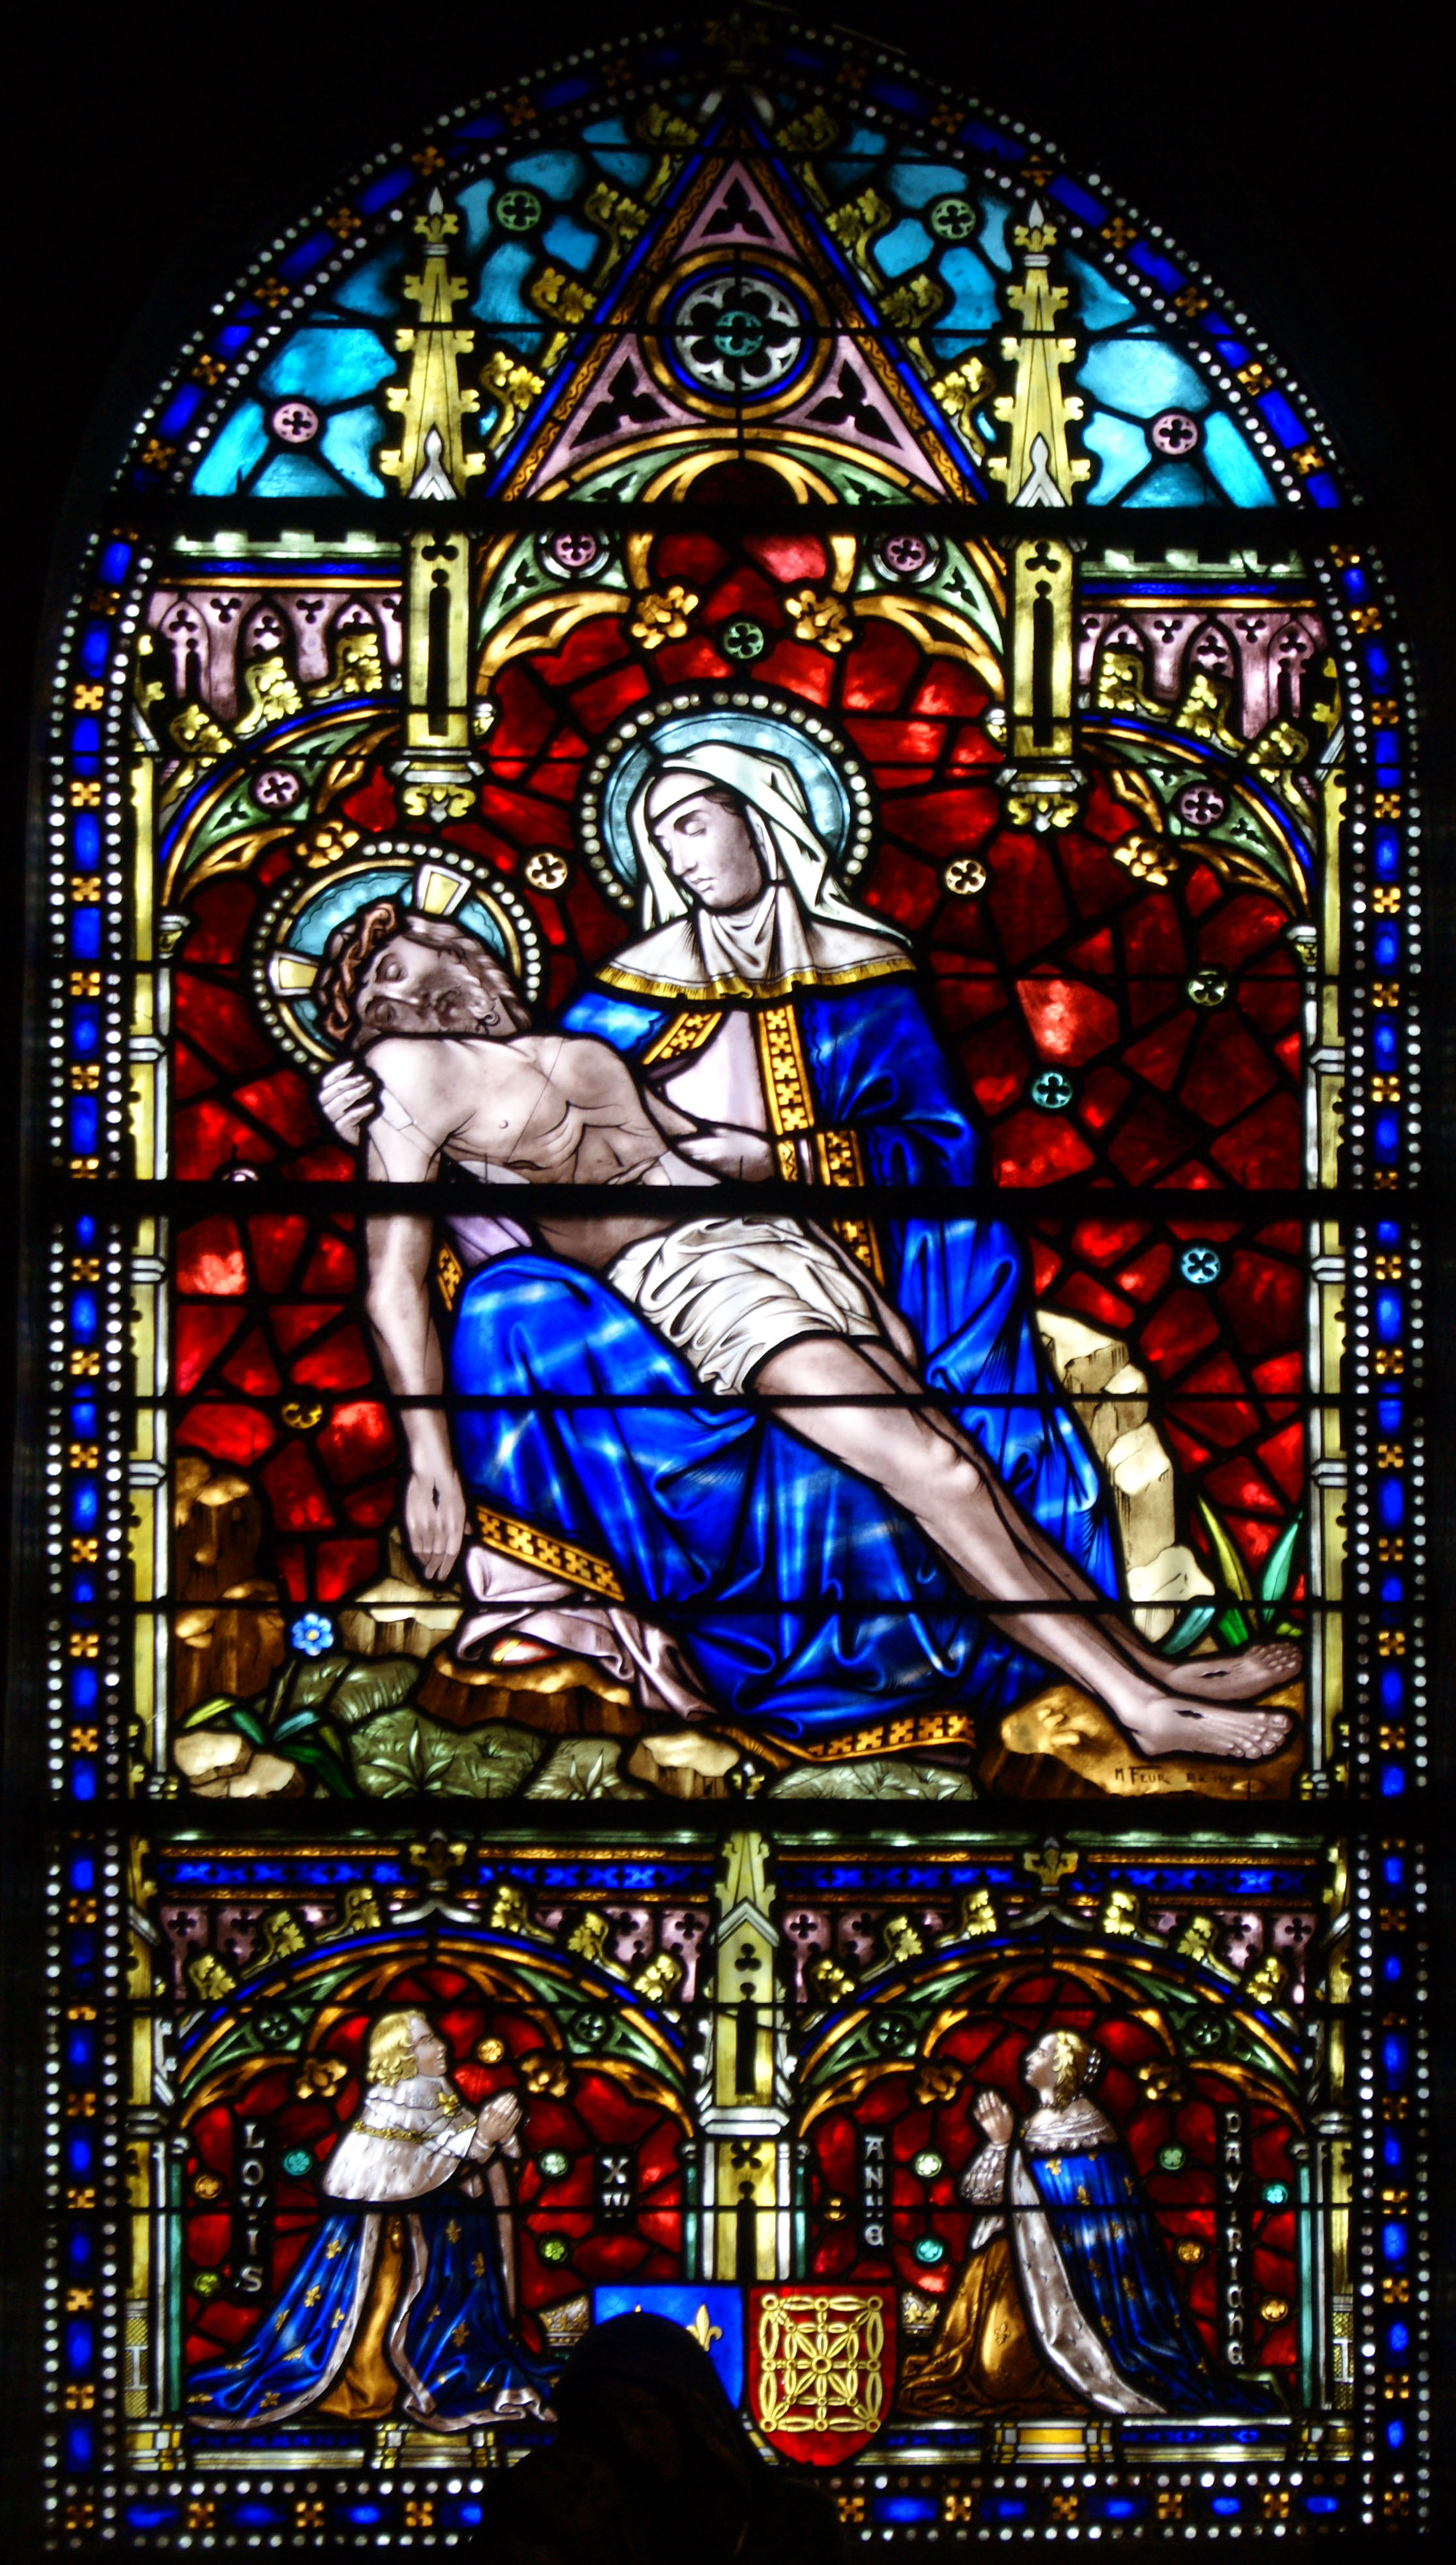 of like not glass is  but  glass a stained lovely Pieta stained painting the window windows original, glass This